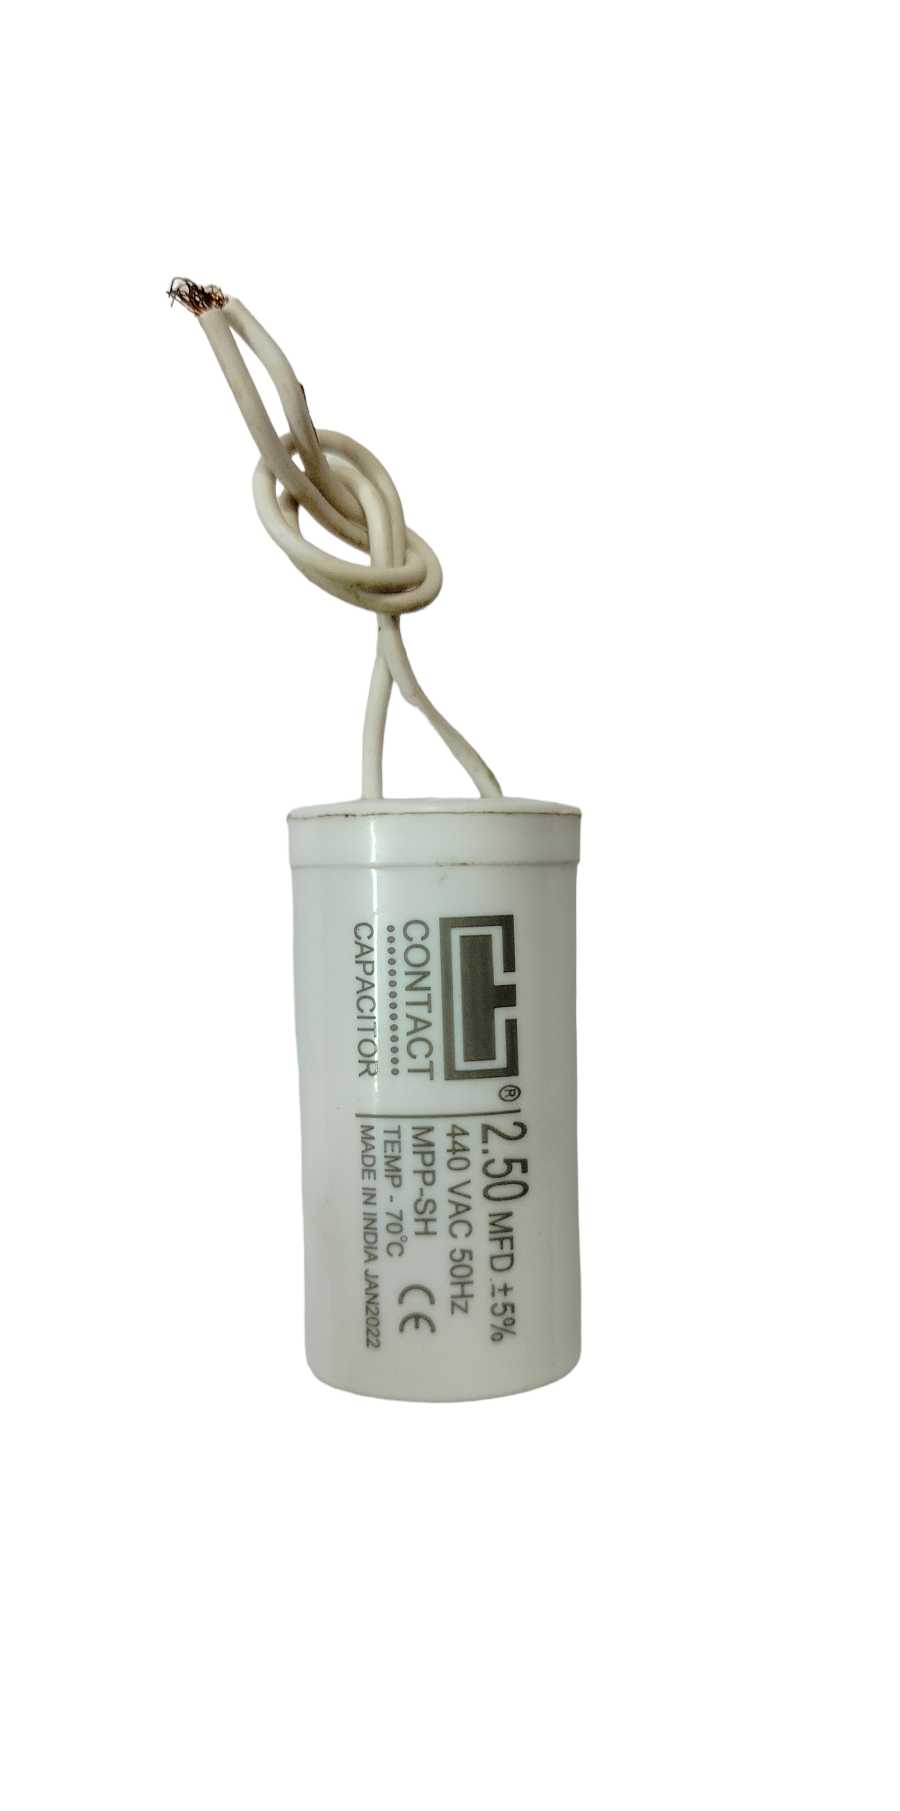 Contact Capacitor 2.50 MFD Supplier in aligarh